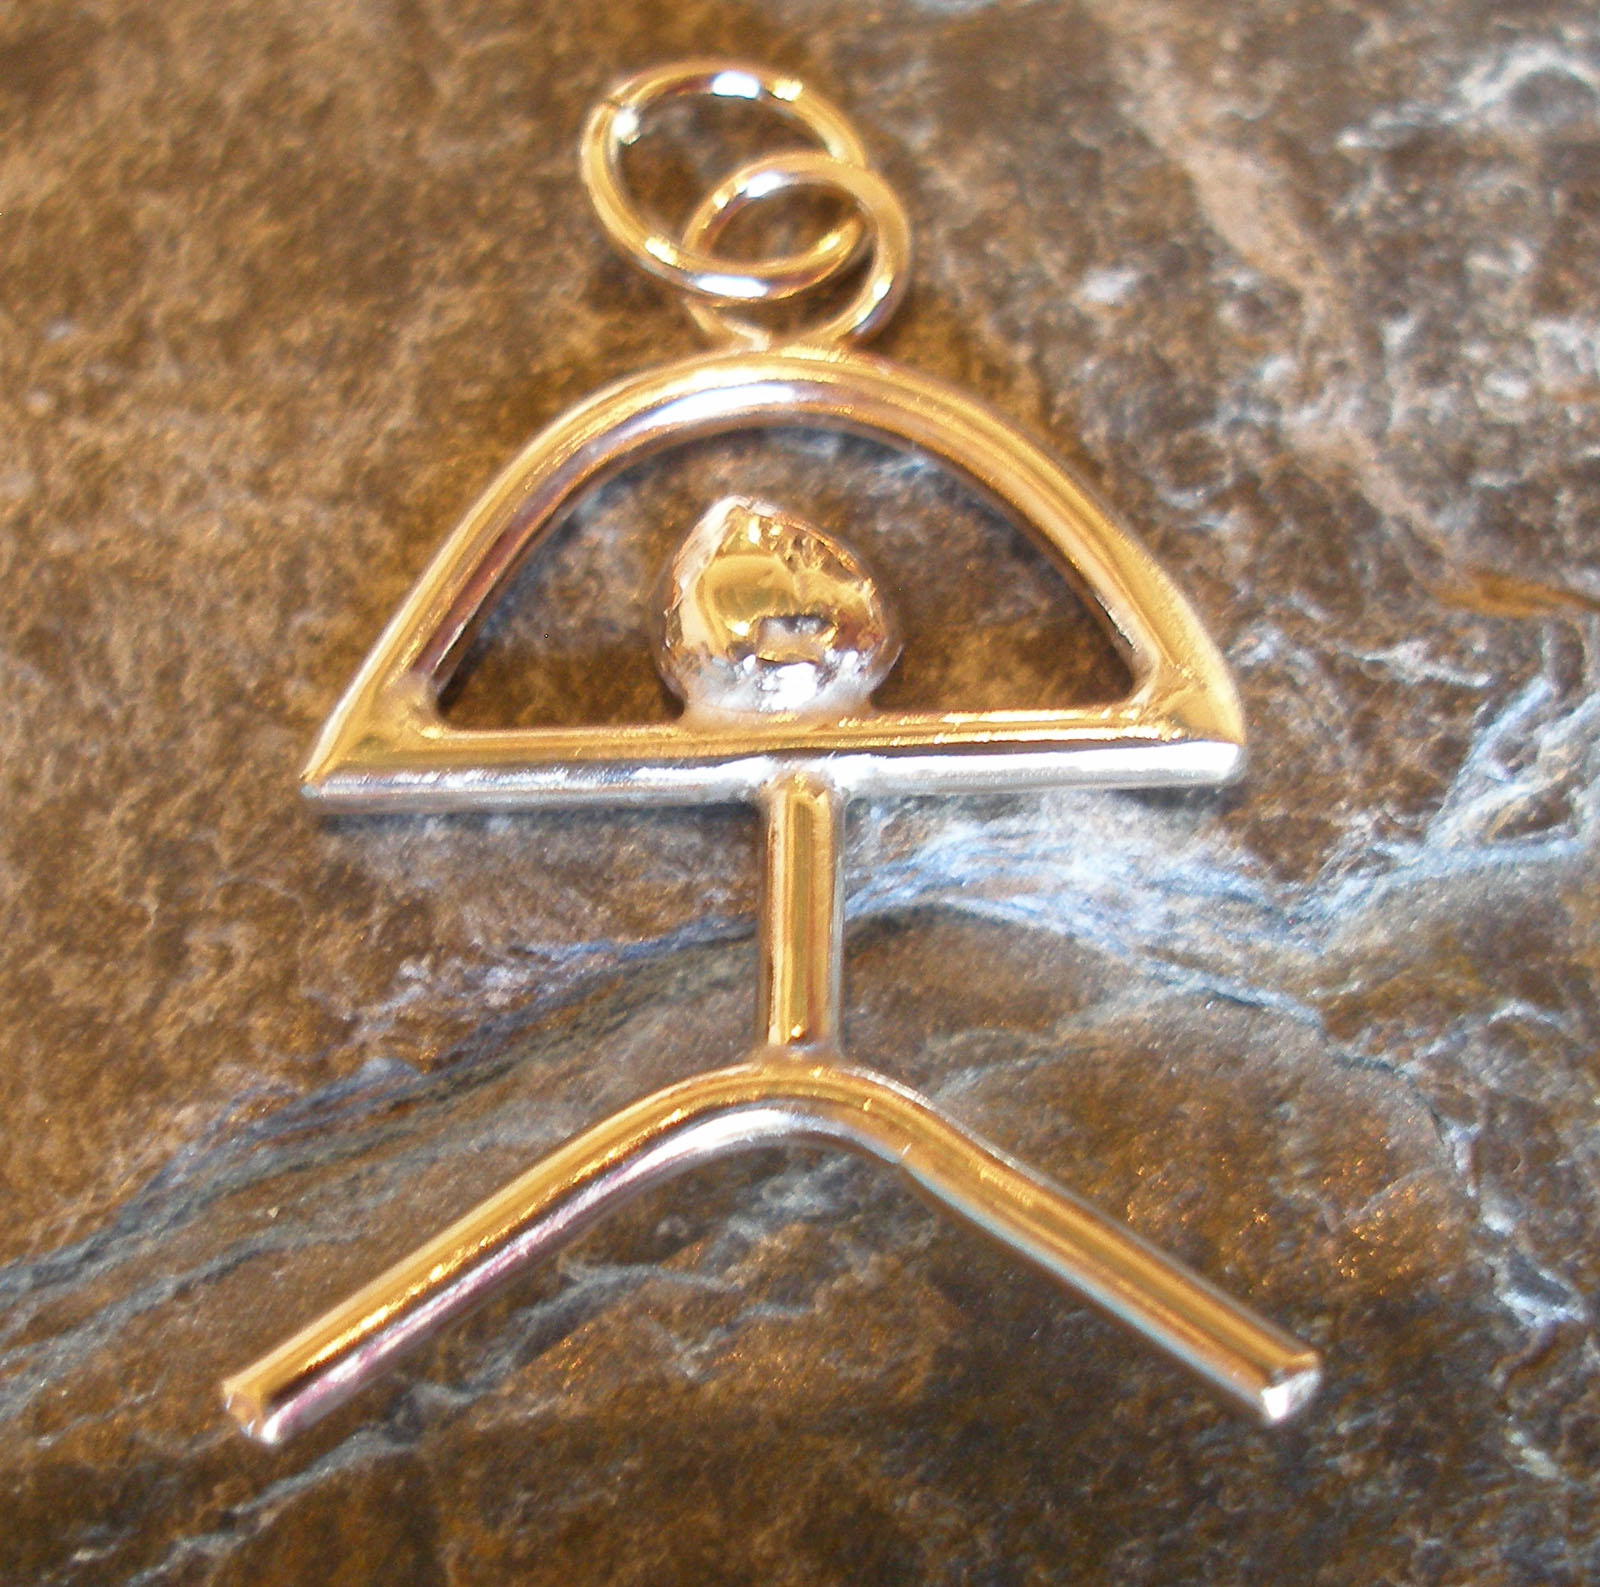 9ct Yellow Gold Indalo Man Pendant in 2 sizes. El Indalo or Almeria Man. Made in Spain.